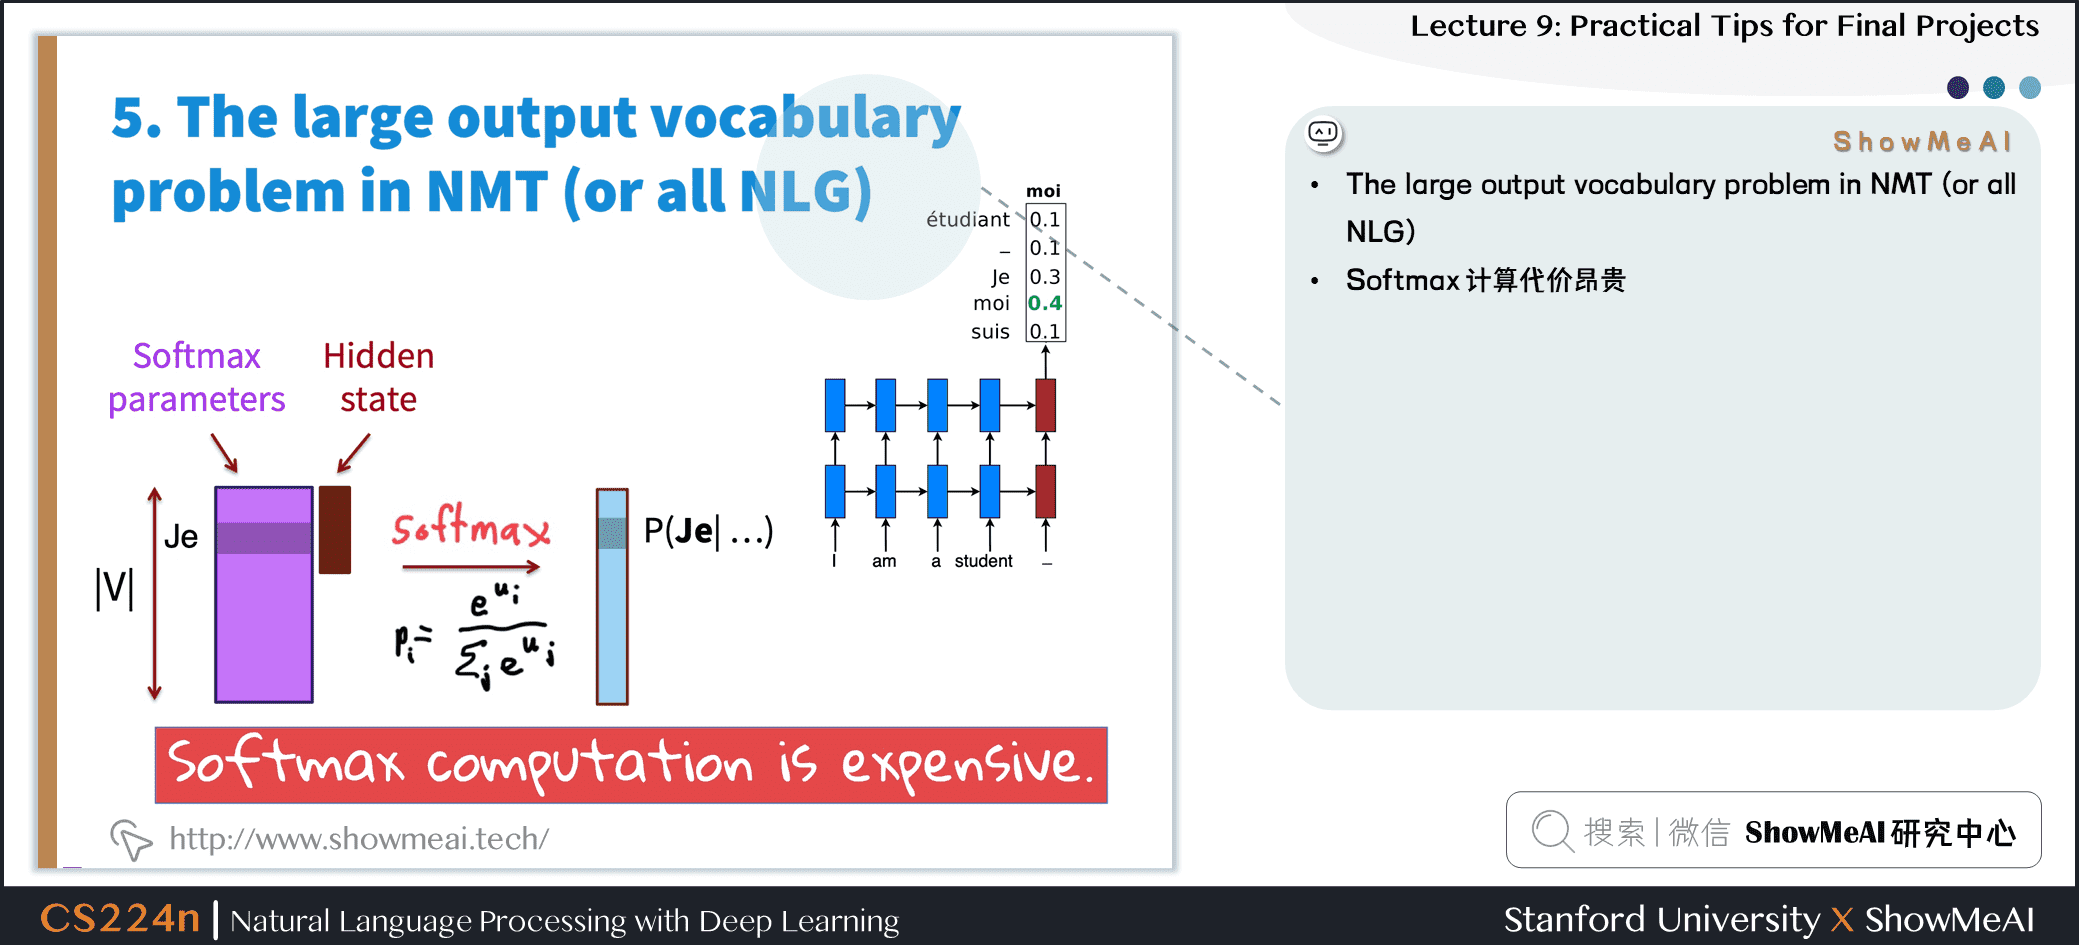 The large output vocabulary problem in NMT (or all NLG)